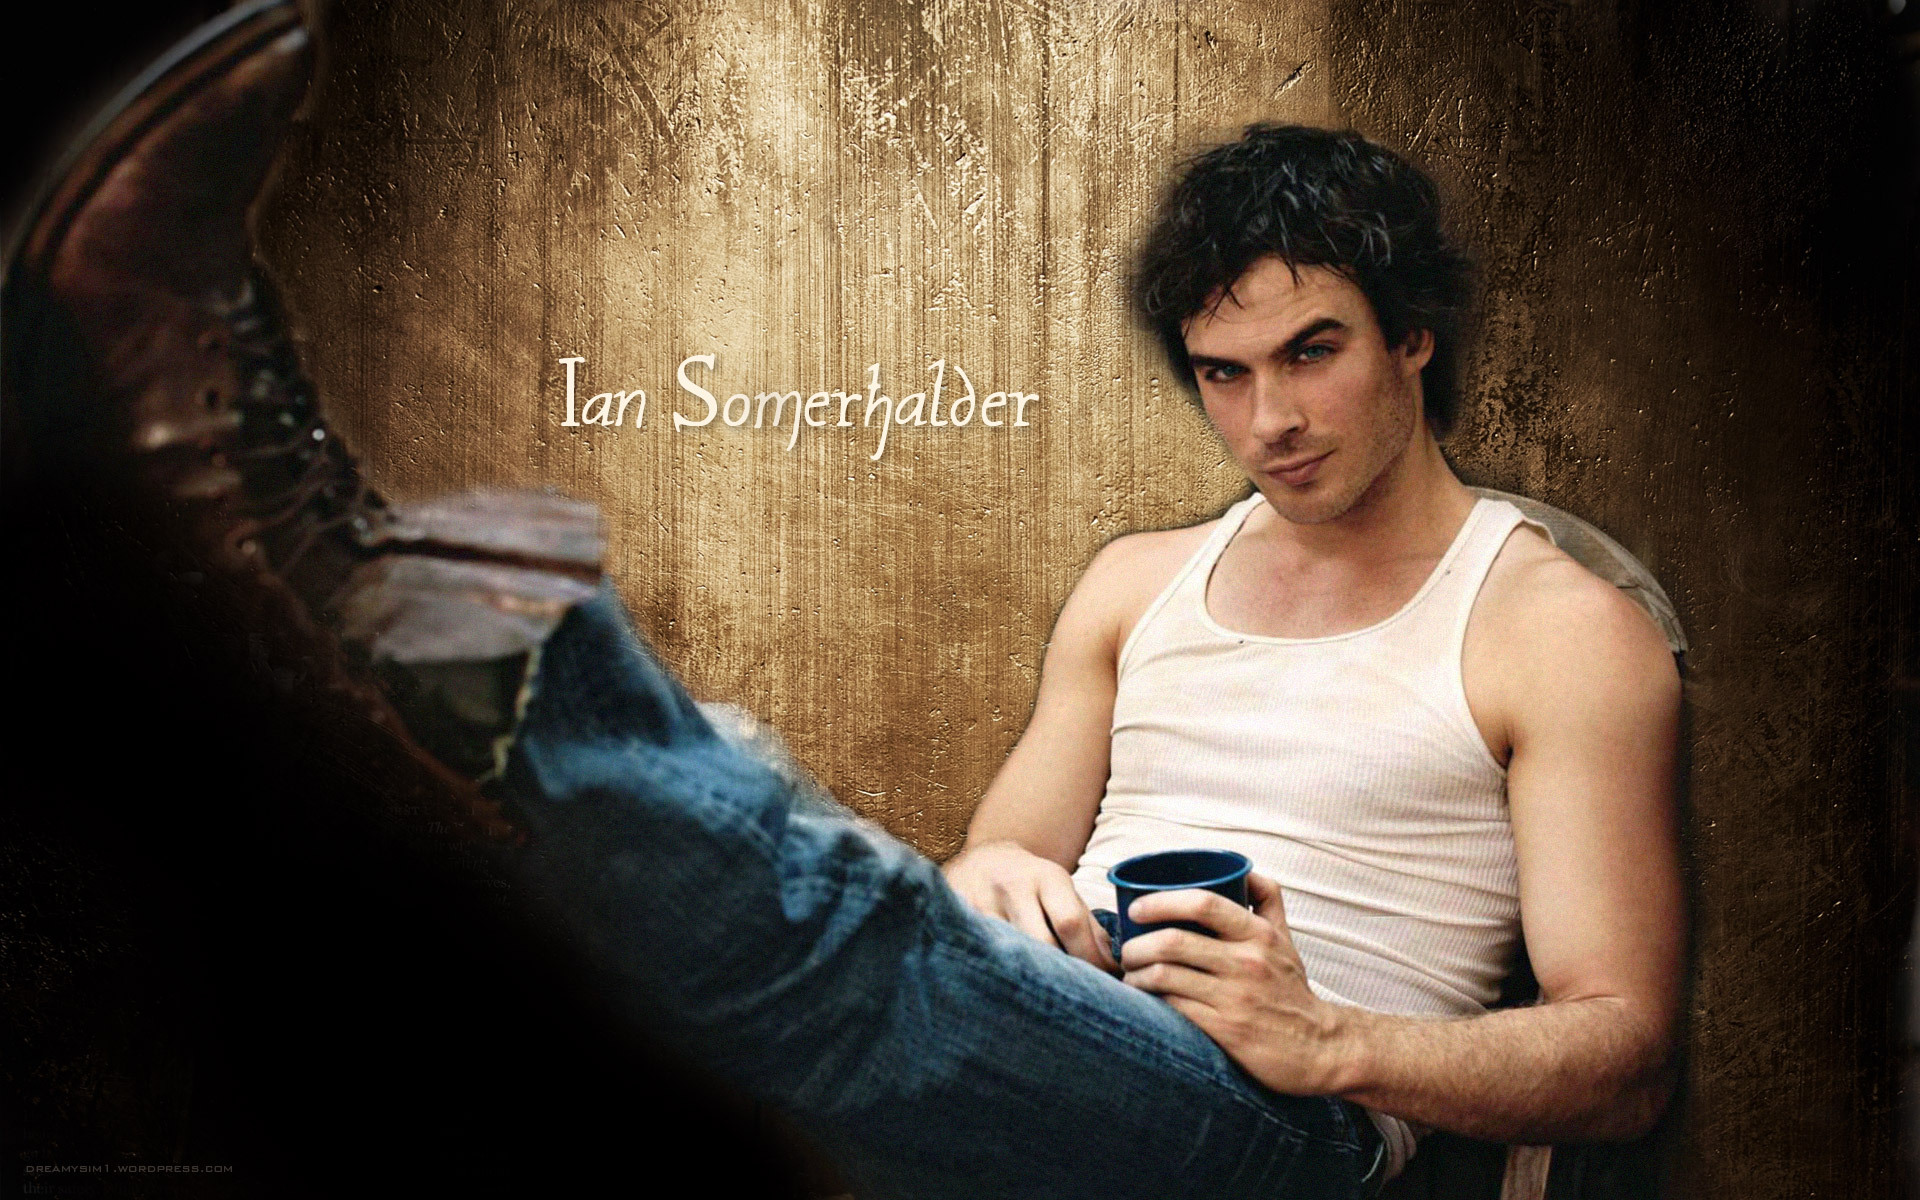 Movie Star Ian Somerhalder wallpapers and images - wallpapers ...